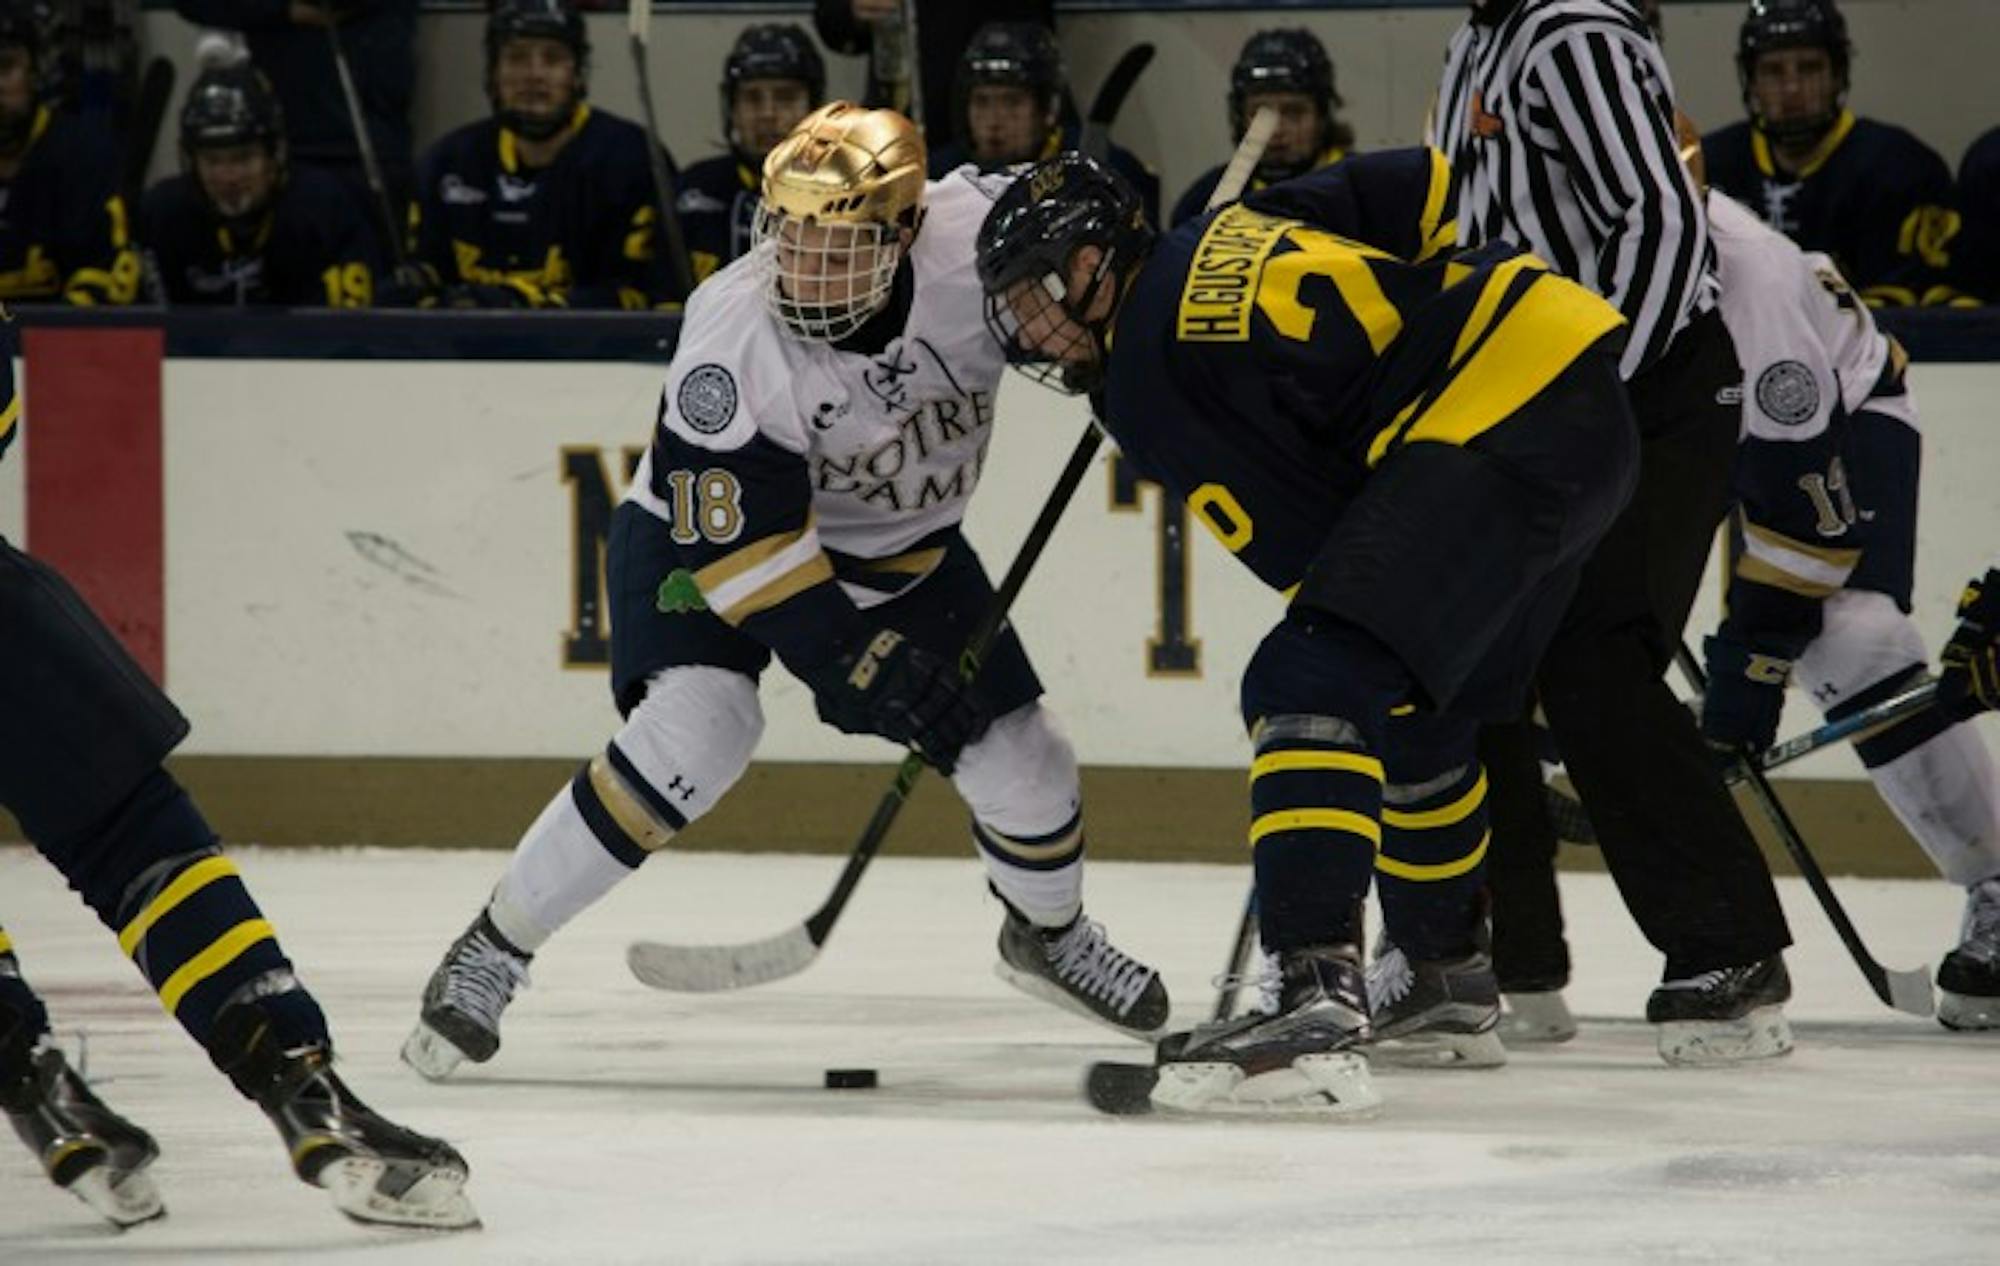 Irish sophomore center Jake Evans fights for a faceoff win during Notre Dame’s 7-2 win over Merrimack on Jan. 15 at Compton Family Ice Arena. Evans has registered a point in six straight games for the Irish.